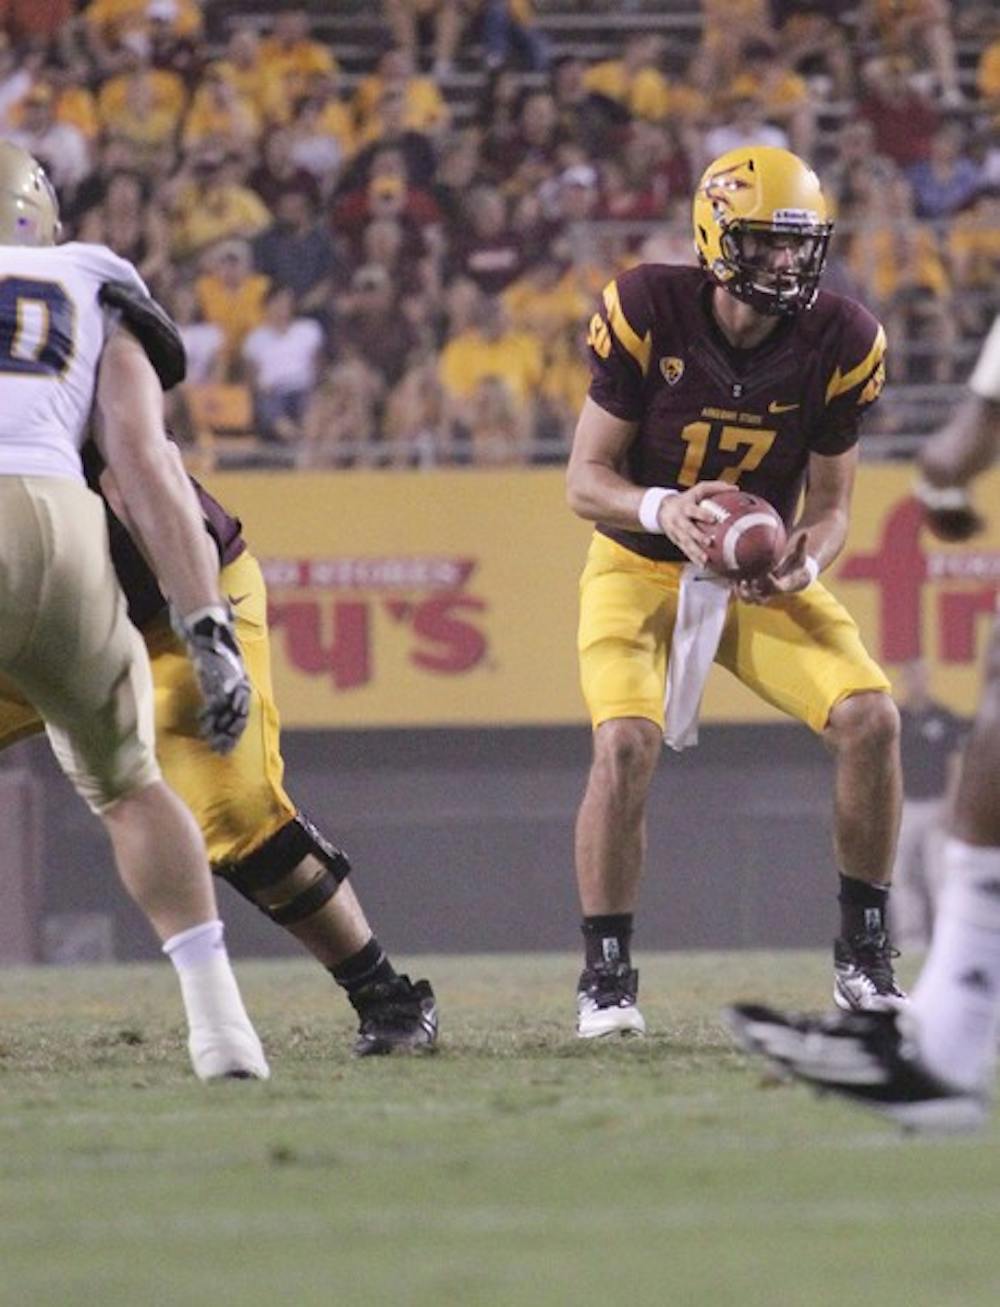 READY TO ROLL: ASU junior quarterback Brock Osweiler takes a snap during the Sun Devils’ win over UC Davis on Thursday. Osweiler said he’s excited for the opportunity to face a ranked opponent in Missouri. (Photo by Beth Easterbrook)